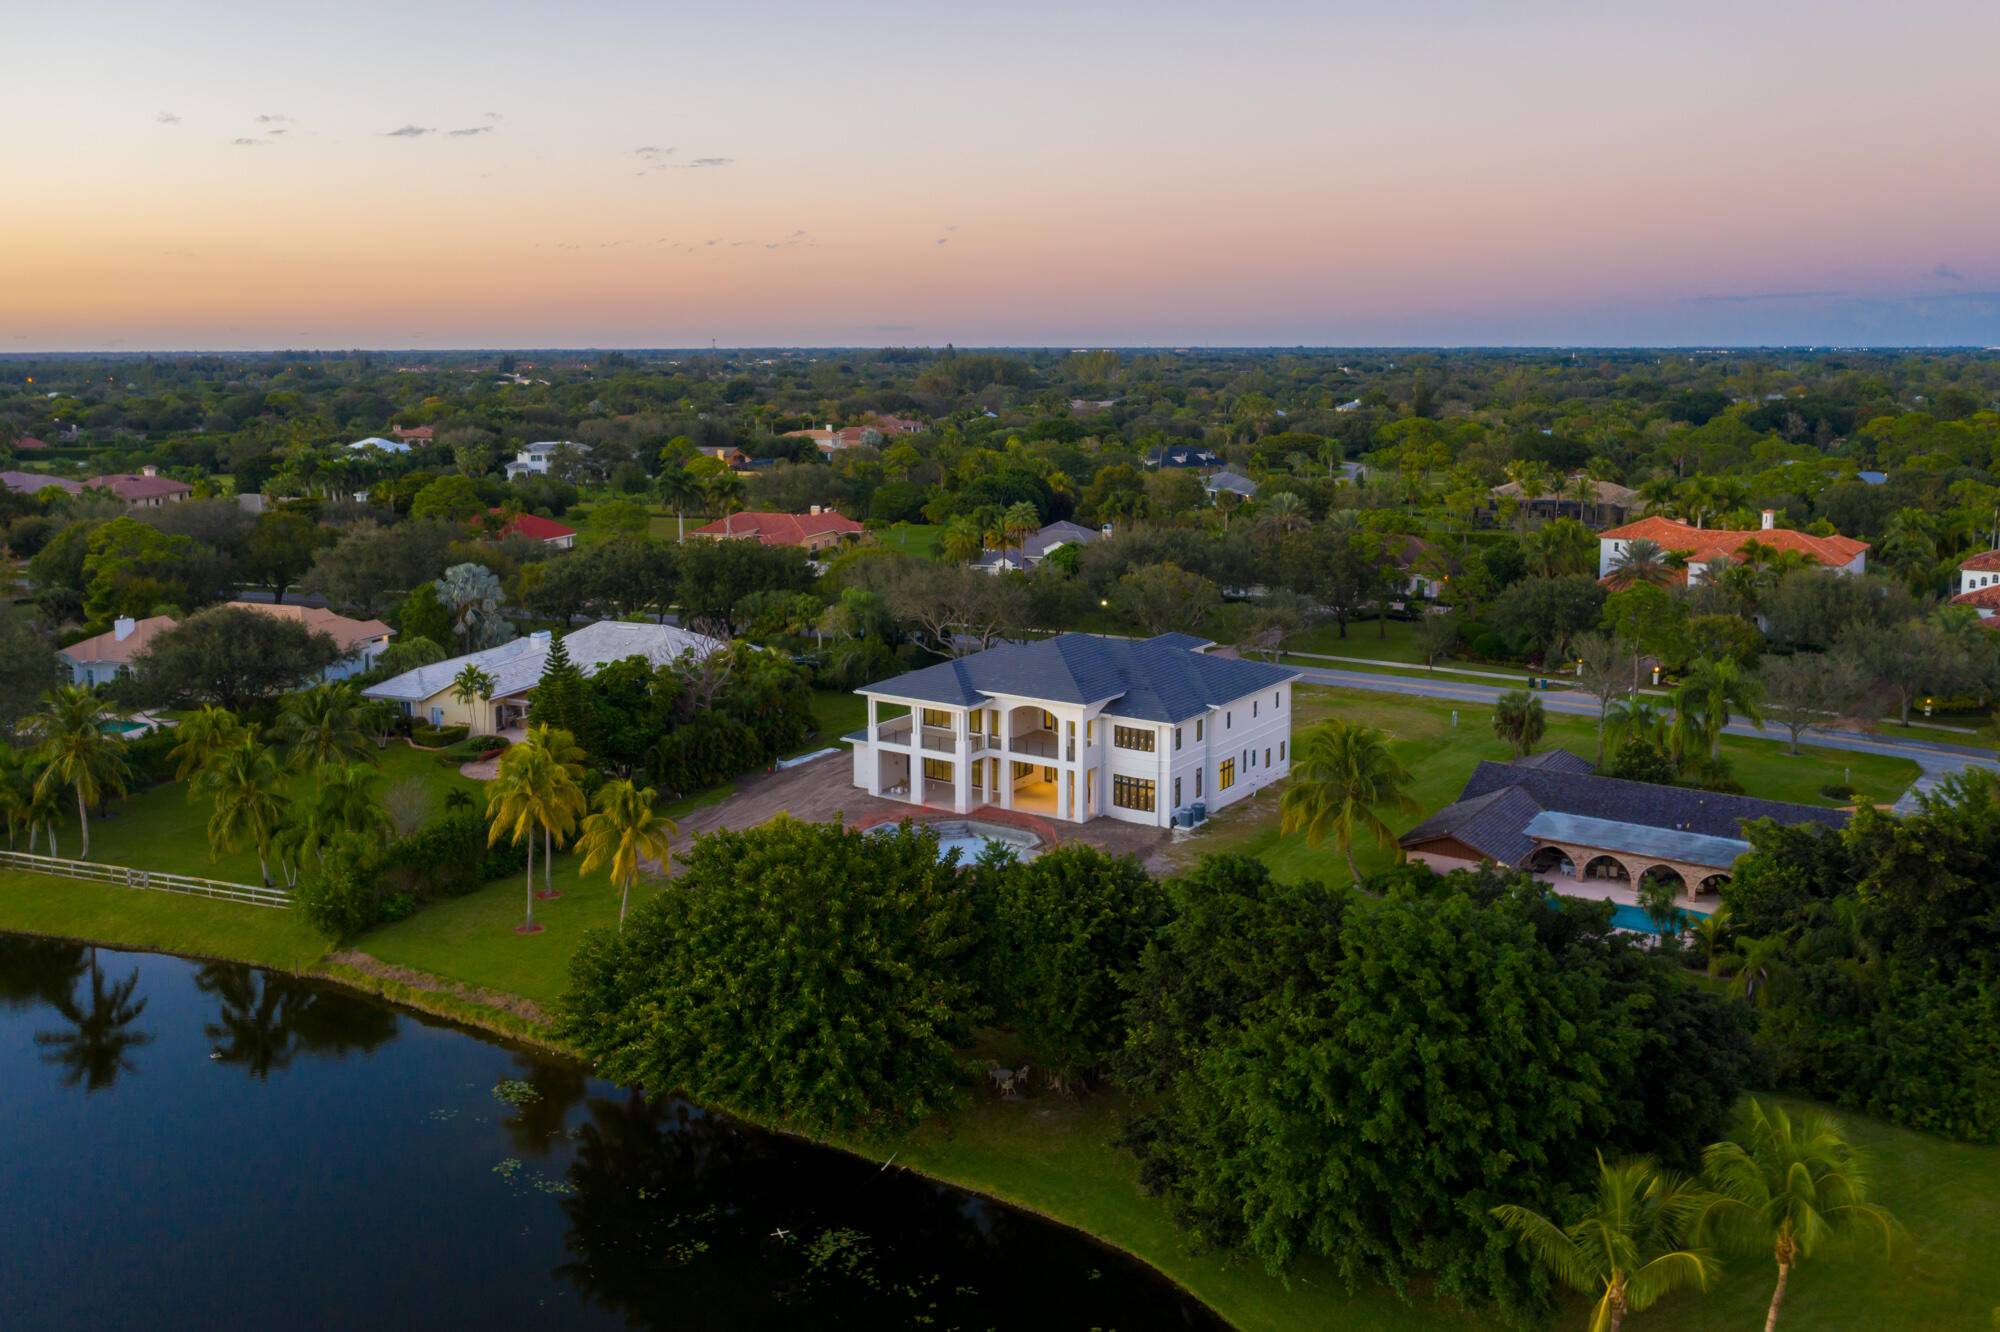 NEW PRICE ! ! Brand New Magnificent Lakefront Estate in the coveted private gated community of Steeplechase in the heart of Palm Beach Gardens.